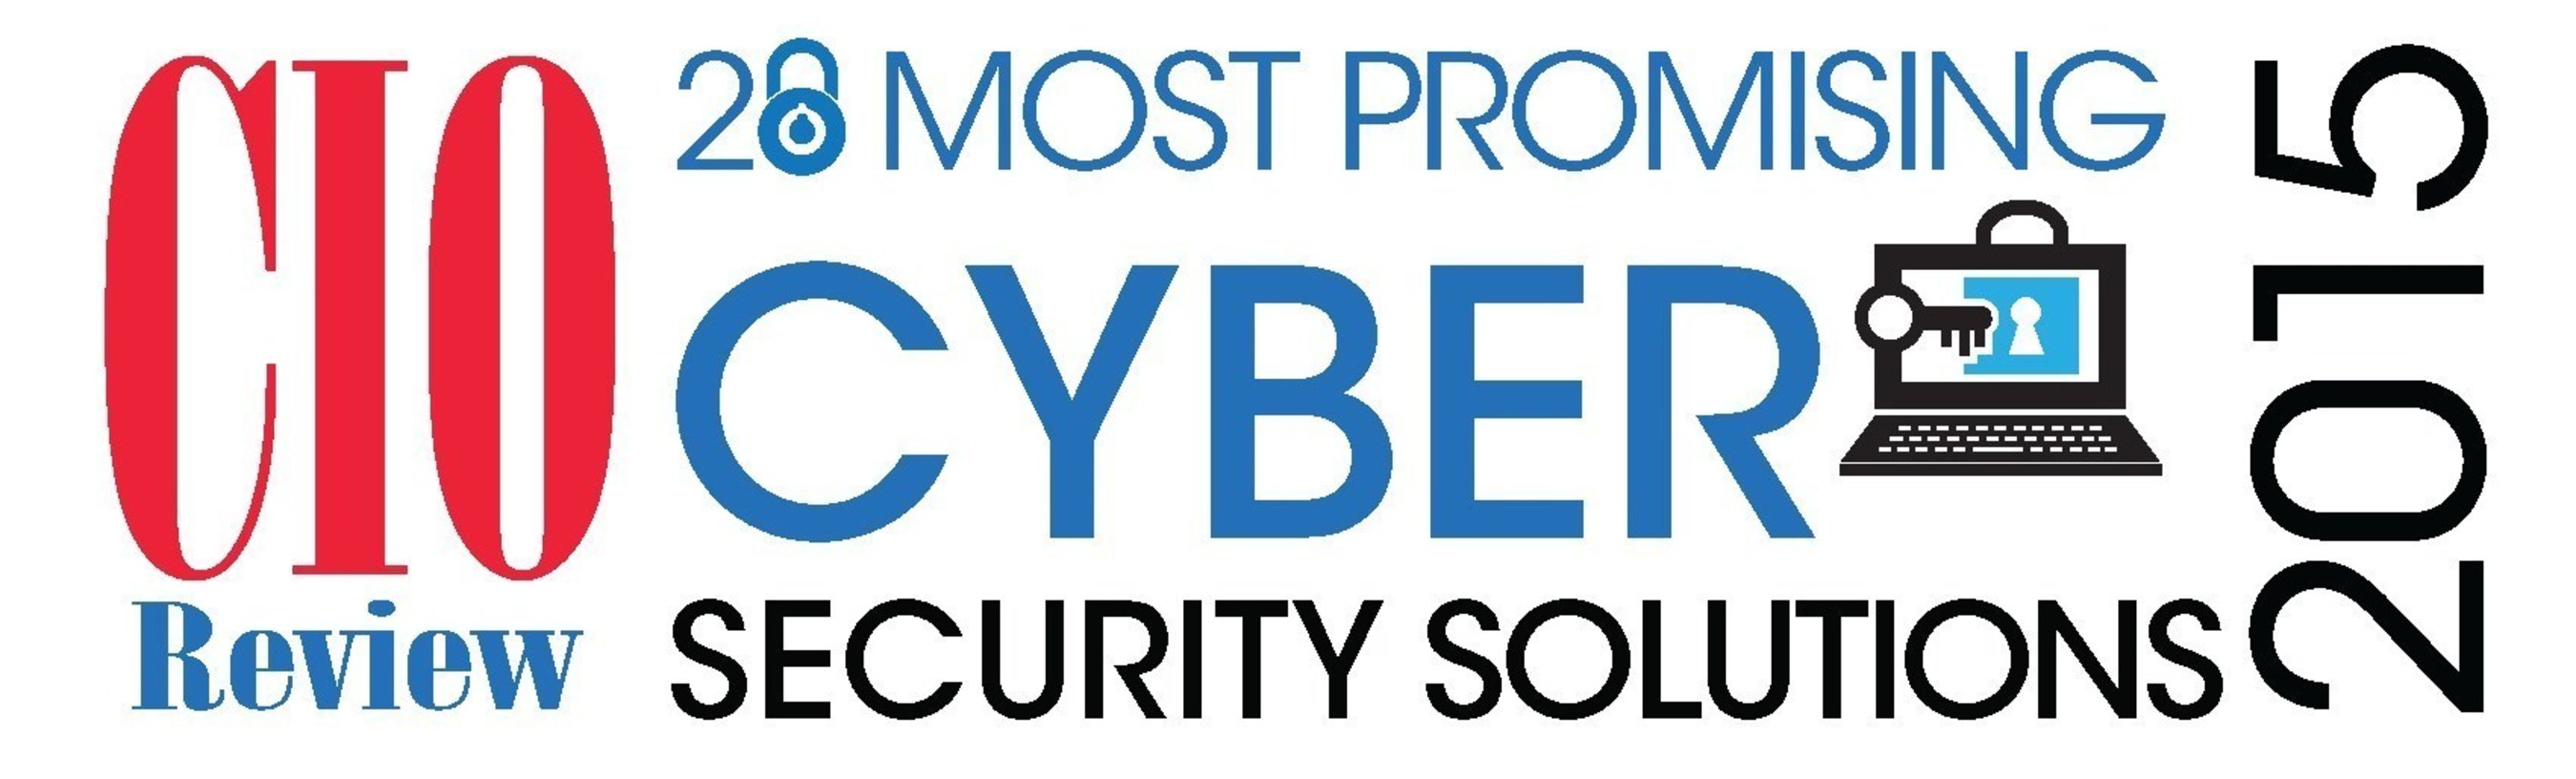 CIO Review - 20 Most Promising Cyber Security Solutions 2015